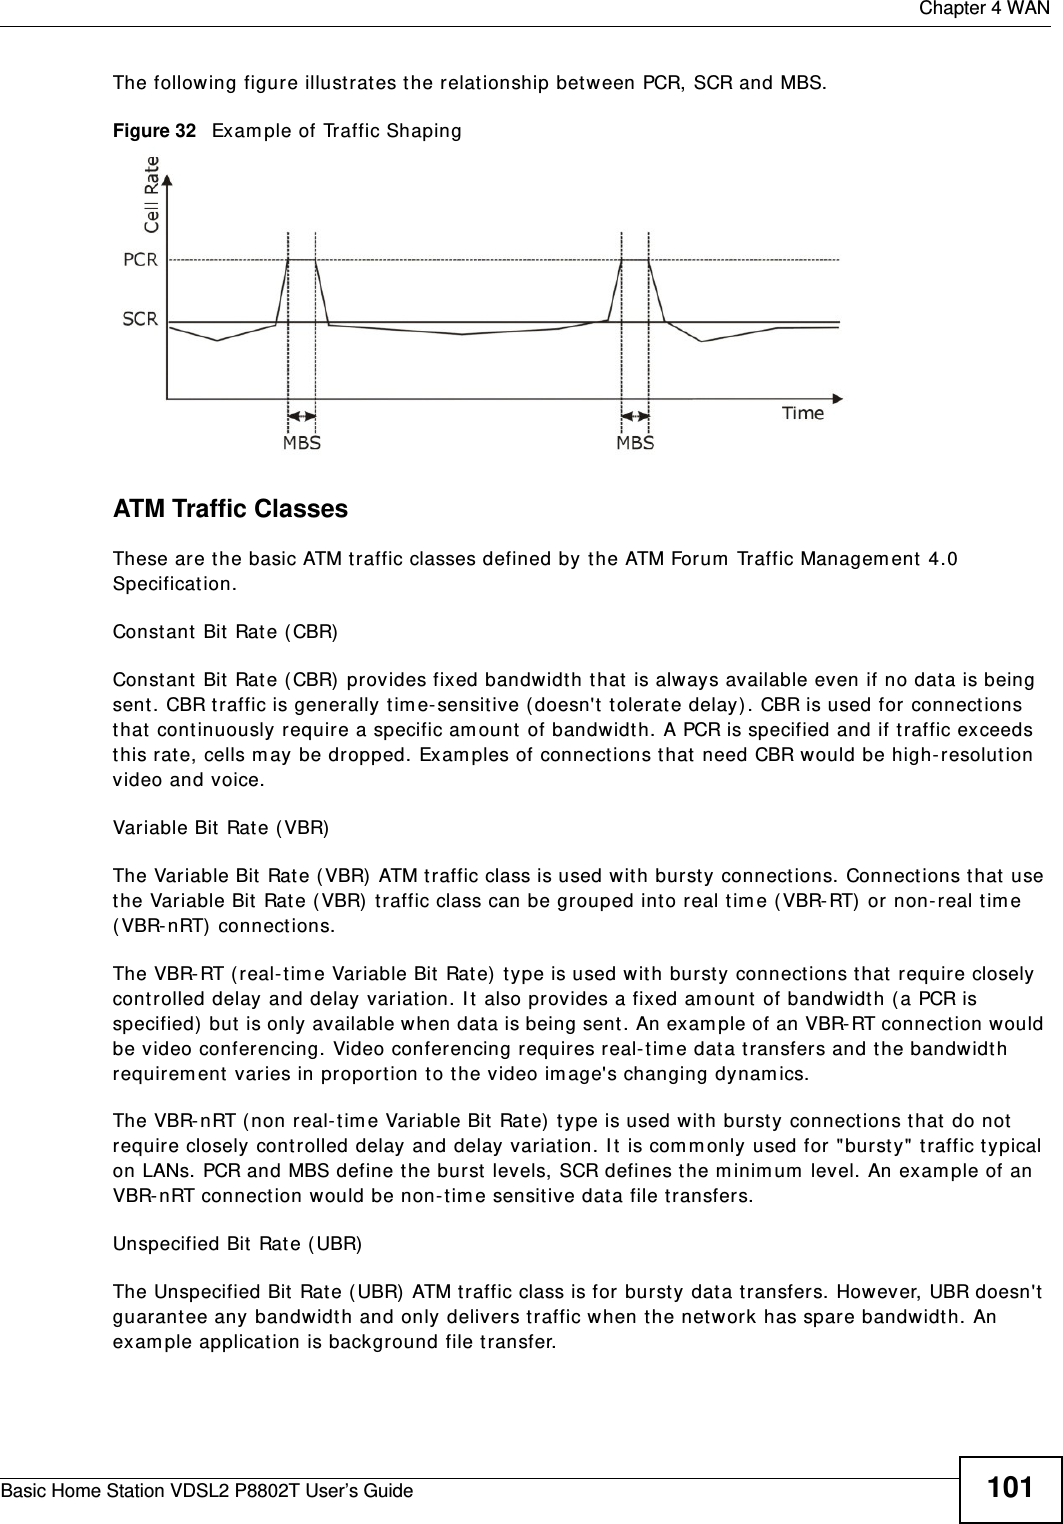  Chapter 4 WANBasic Home Station VDSL2 P8802T User’s Guide 101The following figure illust rat es the relat ionship bet ween PCR, SCR and MBS. Figure 32   Exam ple of Traffic ShapingATM Traffic ClassesThese are the basic ATM t raffic classes defined by t he ATM Forum  Traffic Managem ent  4.0 Specification. Constant  Bit Rate ( CBR)Const ant  Bit  Rate ( CBR) provides fixed bandwidt h t hat  is always available even if no dat a is being sent. CBR traffic is generally tim e- sensitive ( doesn&apos;t t olerate delay) . CBR is used for connect ions that  cont inuously require a specific am ount  of bandwidt h. A PCR is specified and if traffic exceeds this rat e, cells m ay be dropped. Examples of connect ions t hat  need CBR would be high- resolut ion video and voice.Variable Bit Rat e ( VBR) The Variable Bit Rat e ( VBR) ATM t raffic class is used with burst y connections. Connections that  use the Variable Bit Rat e ( VBR) traffic class can be grouped int o real tim e (VBR-RT)  or non-real tim e ( VBR-nRT)  connect ions. The VBR- RT ( real-t im e Variable Bit Rat e)  t ype is used wit h burst y connect ions that require closely controlled delay and delay variat ion. I t  also provides a fixed am ount  of bandwidth ( a PCR is specified)  but is only available when data is being sent . An exam ple of an VBR-RT connect ion would be video conferencing. Video conferencing requires real- t im e dat a t ransfers and t he bandwidth requirem ent varies in proport ion to the video im age&apos;s changing dynam ics. The VBR- nRT ( non real-tim e Variable Bit  Rate)  t ype is used with bursty connect ions t hat  do not  require closely controlled delay and delay variat ion. I t is com m only used for &quot;burst y&quot; t raffic typical on LANs. PCR and MBS define t he burst levels, SCR defines the m inim um  level. An exam ple of an VBR- nRT connect ion would be non-t im e sensitive dat a file t ransfers.Unspecified Bit Rat e ( UBR)The Unspecified Bit Rat e ( UBR) ATM t raffic class is for bursty dat a t ransfers. However, UBR doesn&apos;t  guarant ee any bandwidt h and only delivers traffic when t he net work has spare bandwidt h. An exam ple applicat ion is background file t ransfer.